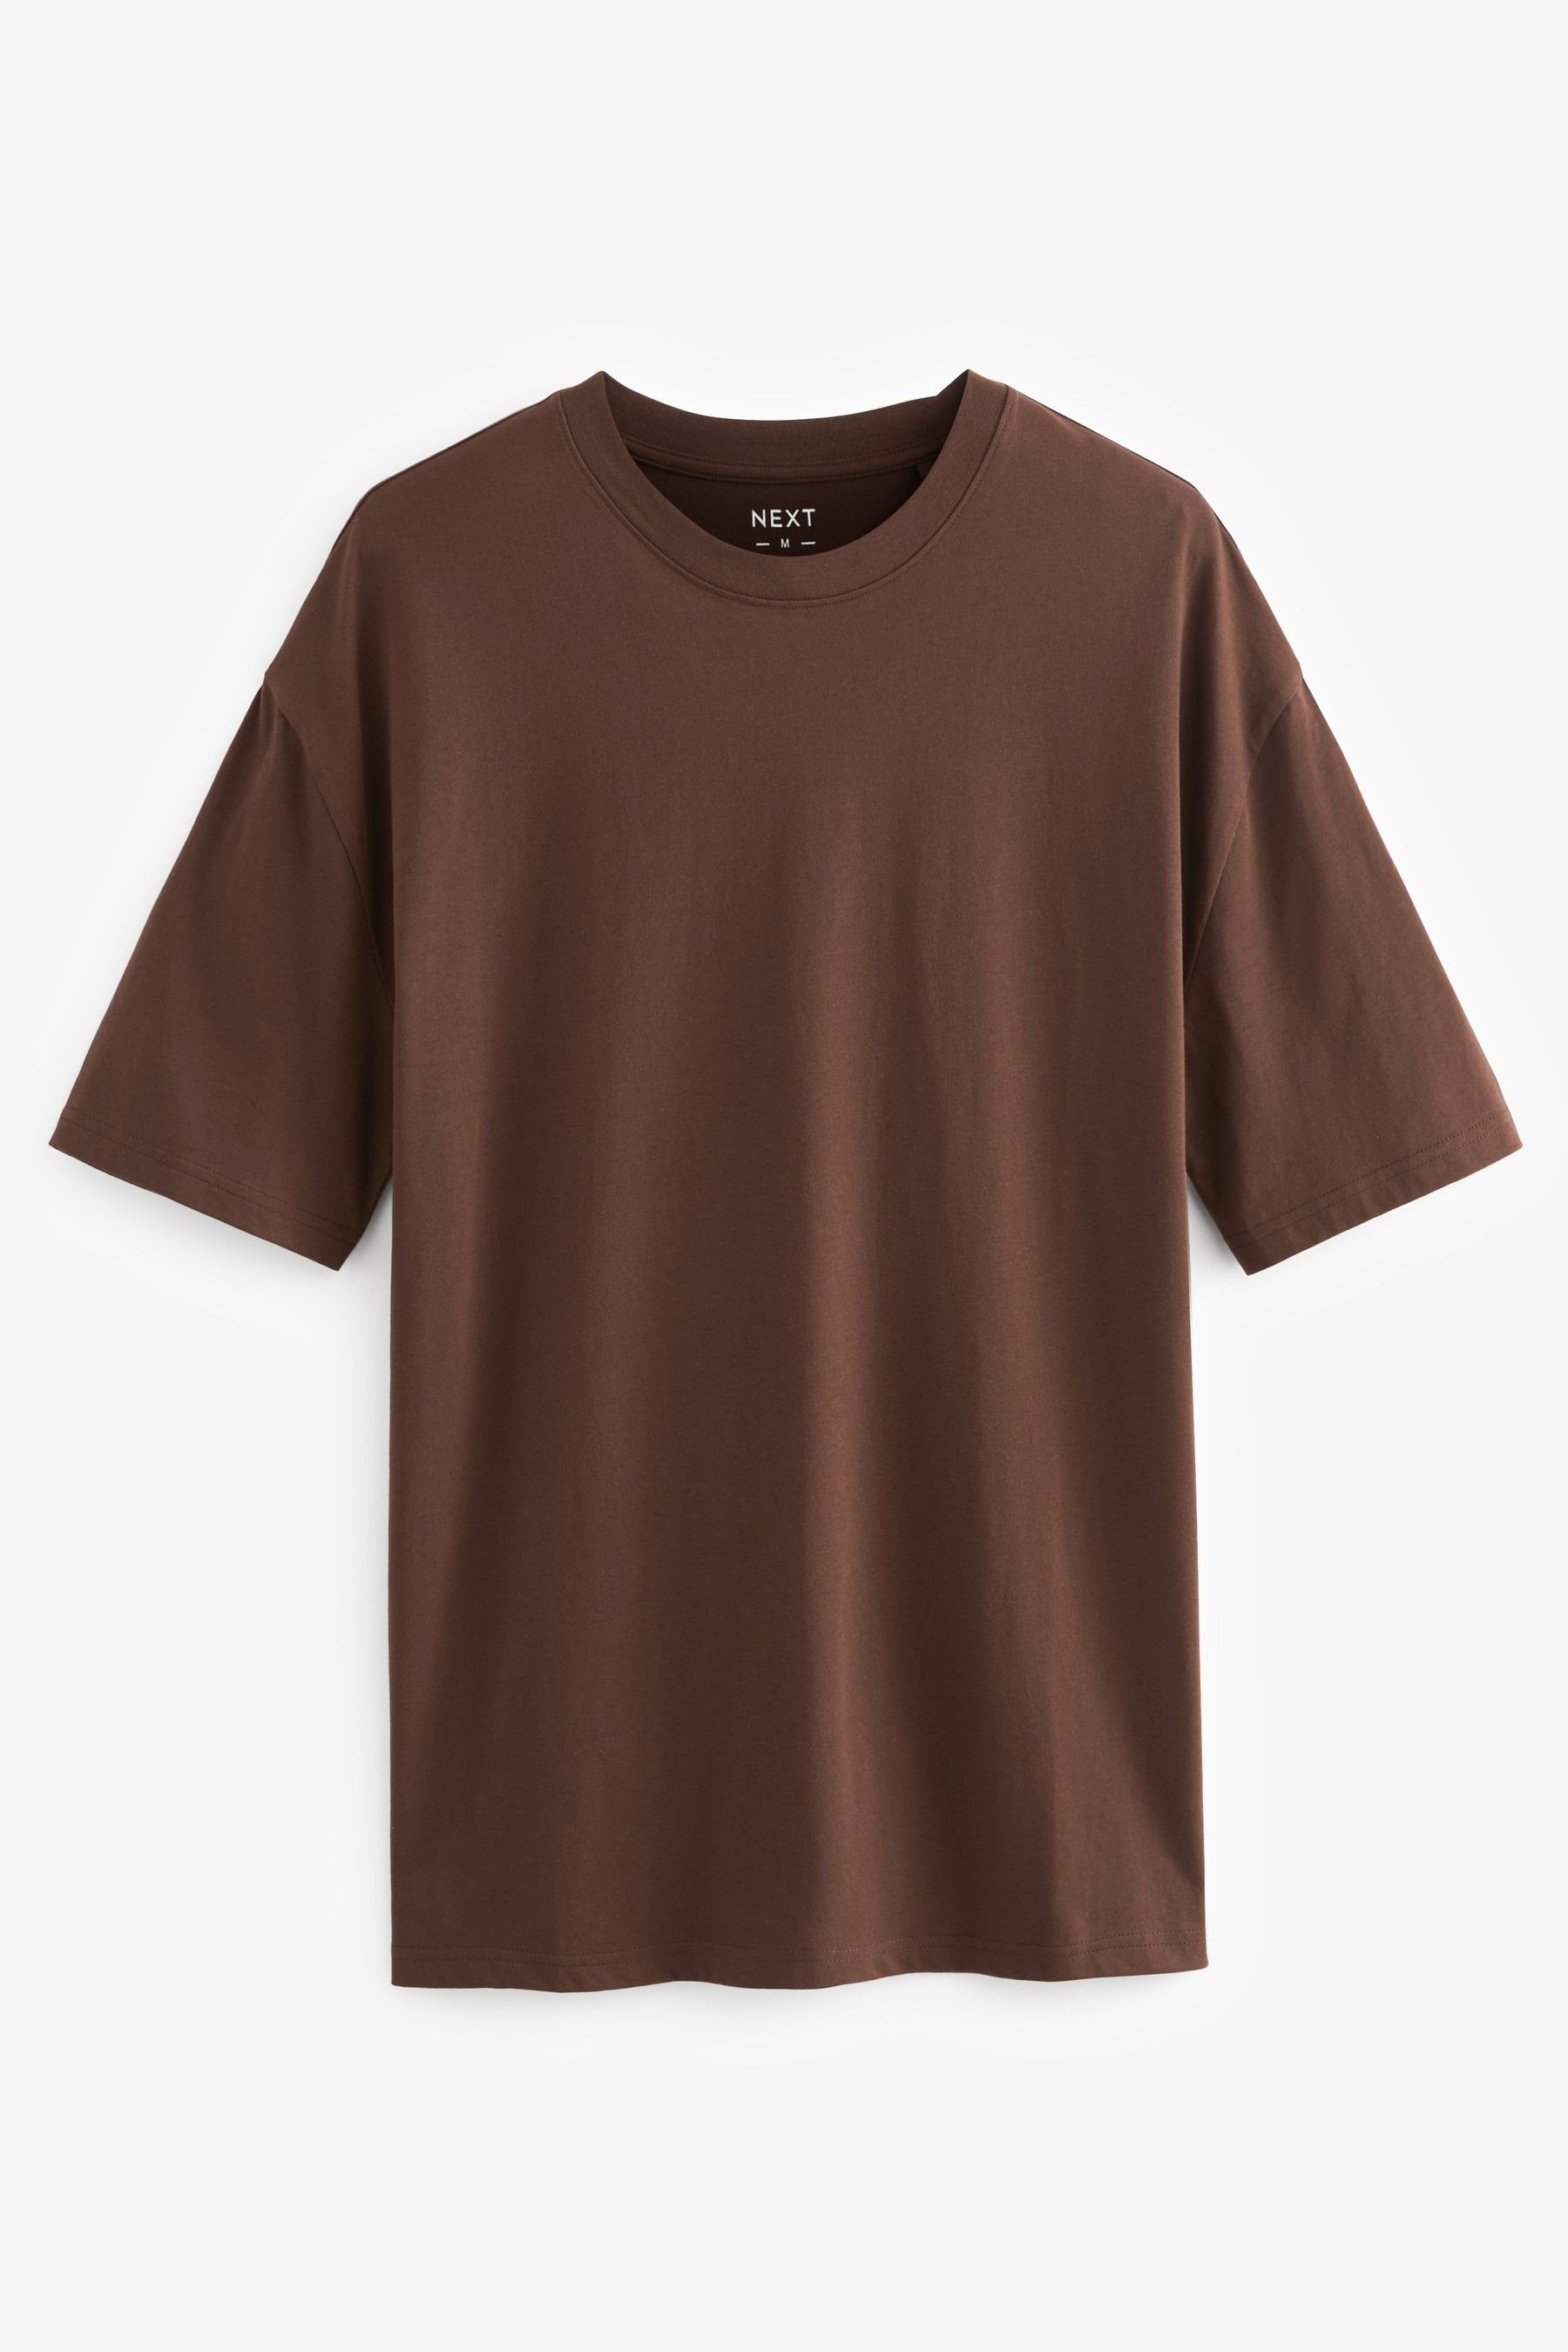 Rundhals-T-Shirt T-Shirt (1-tlg) Fit Chocolate Brown im Next Relaxed